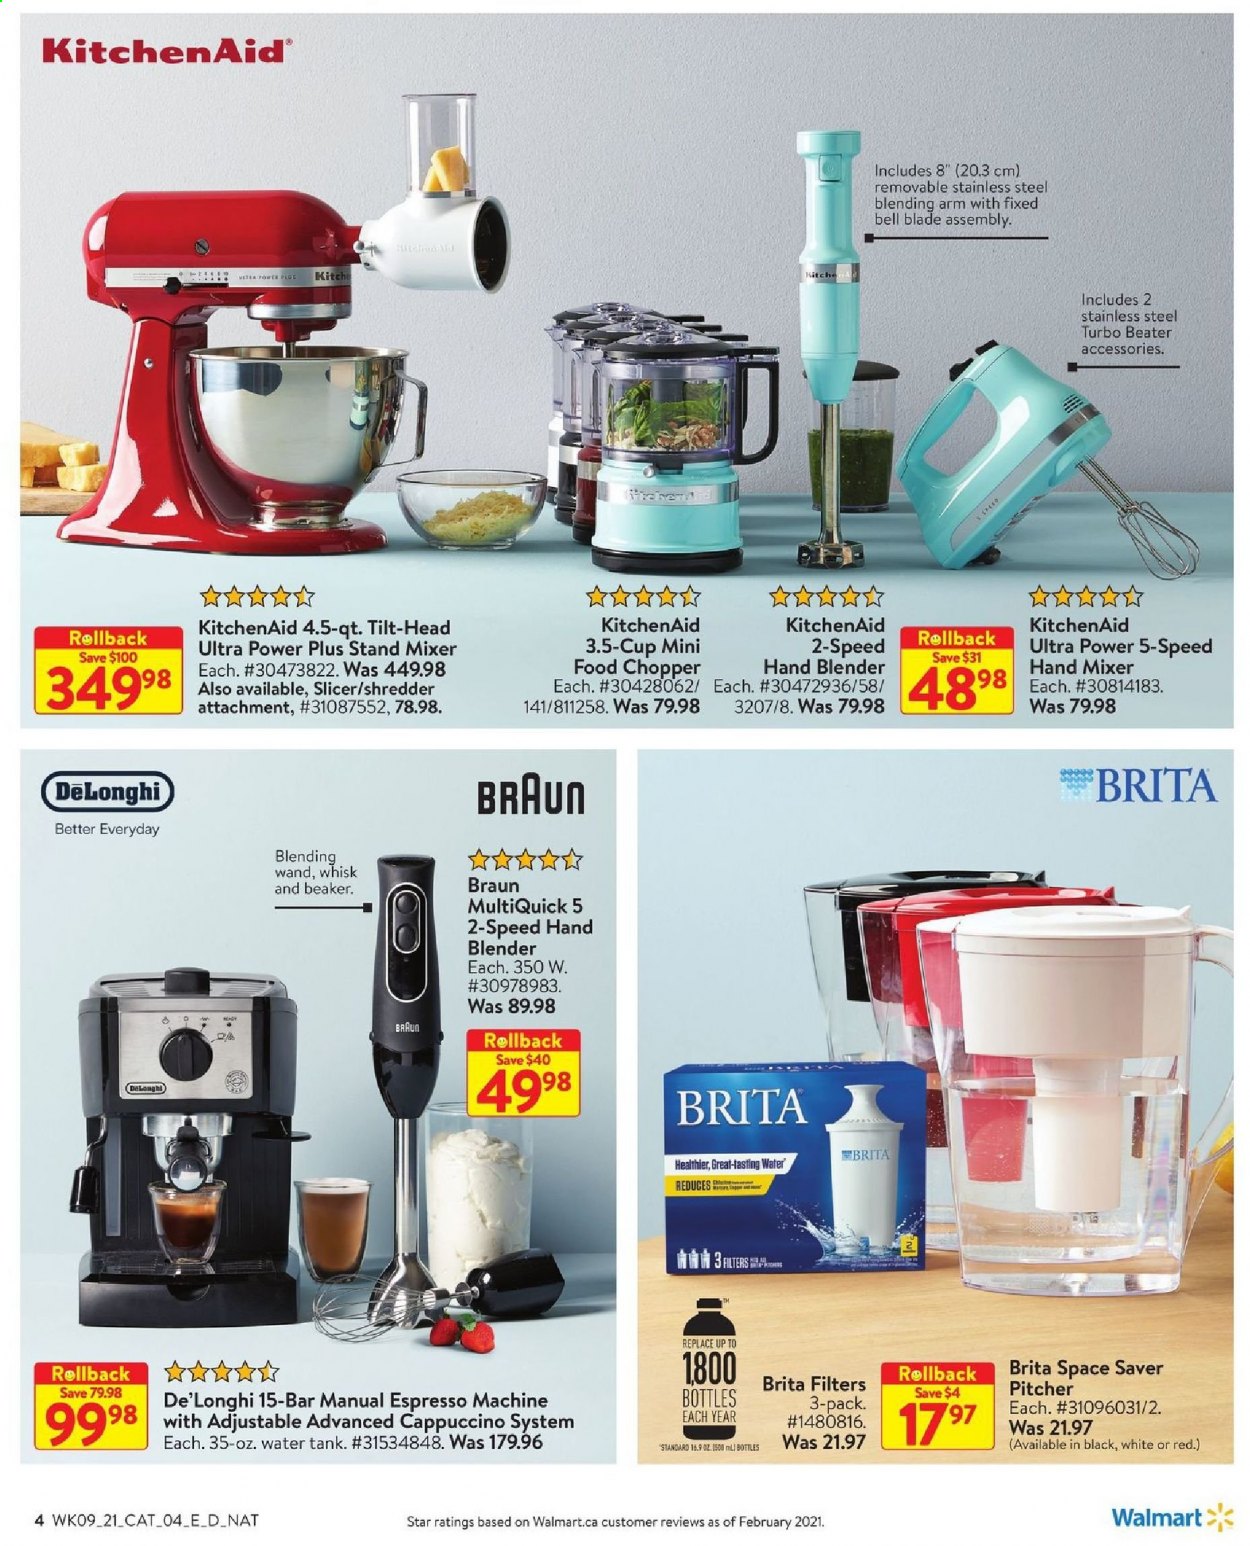 thumbnail - Walmart Flyer - March 25, 2021 - April 21, 2021 - Sales products - cappuccino, KitchenAid, pitcher, slicer, cup, handy chopper, tank, coffee machine, De'Longhi, espresso maker, mixer, stand mixer, hand mixer, hand blender, shredder. Page 4.